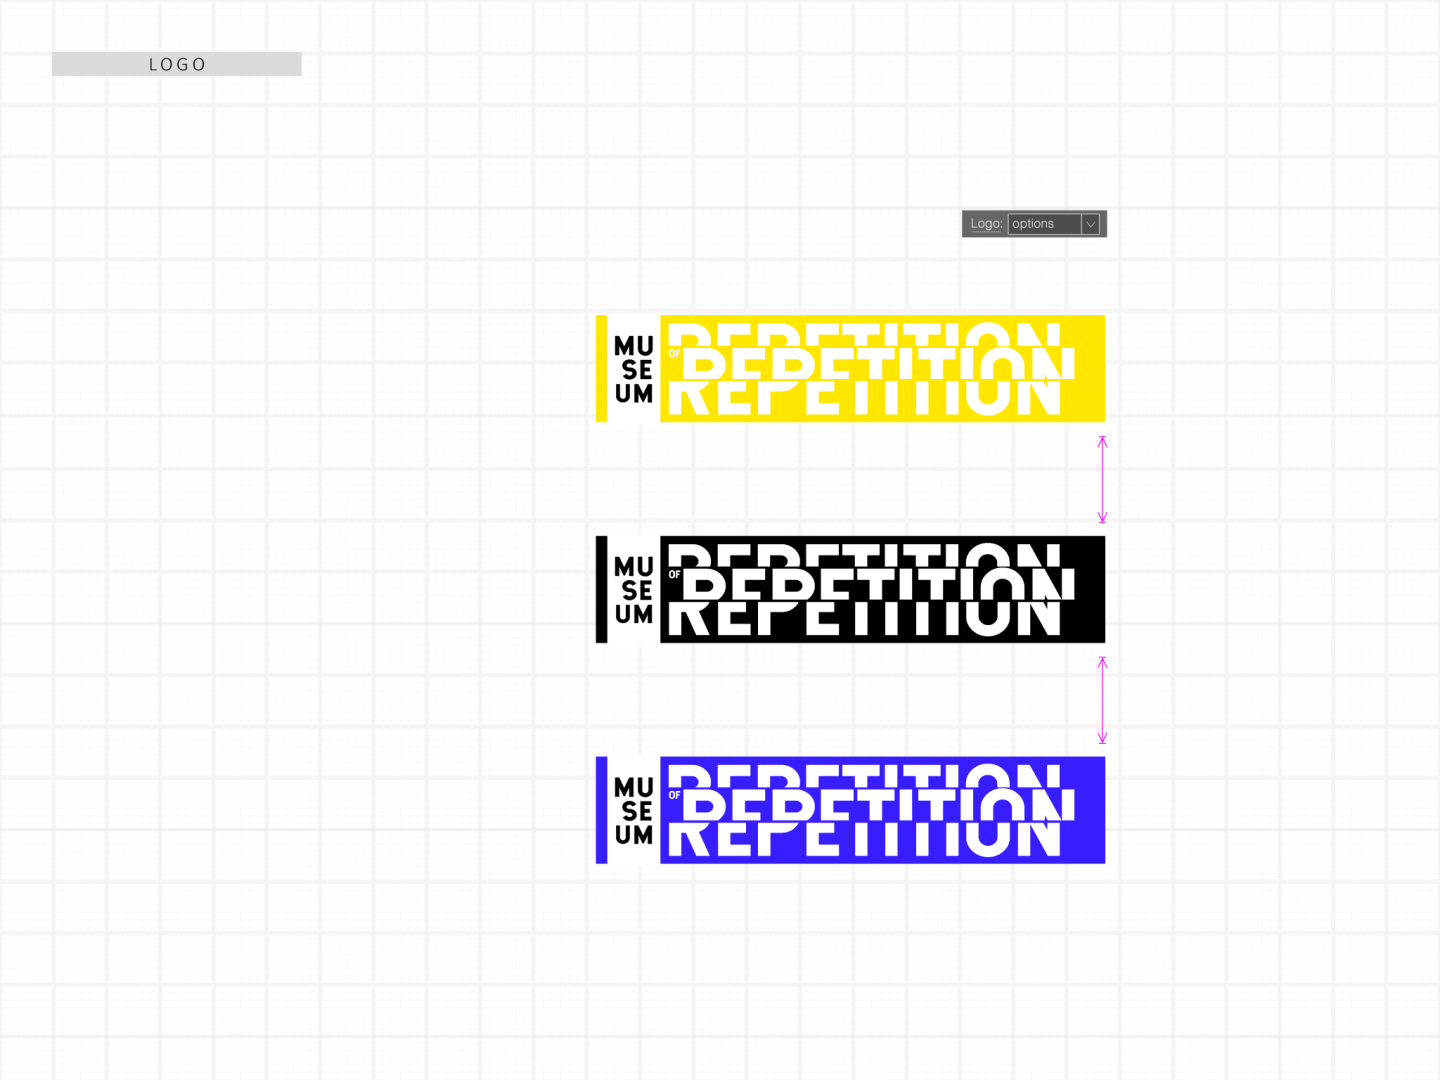 Repetition Museum Proposal & Branding